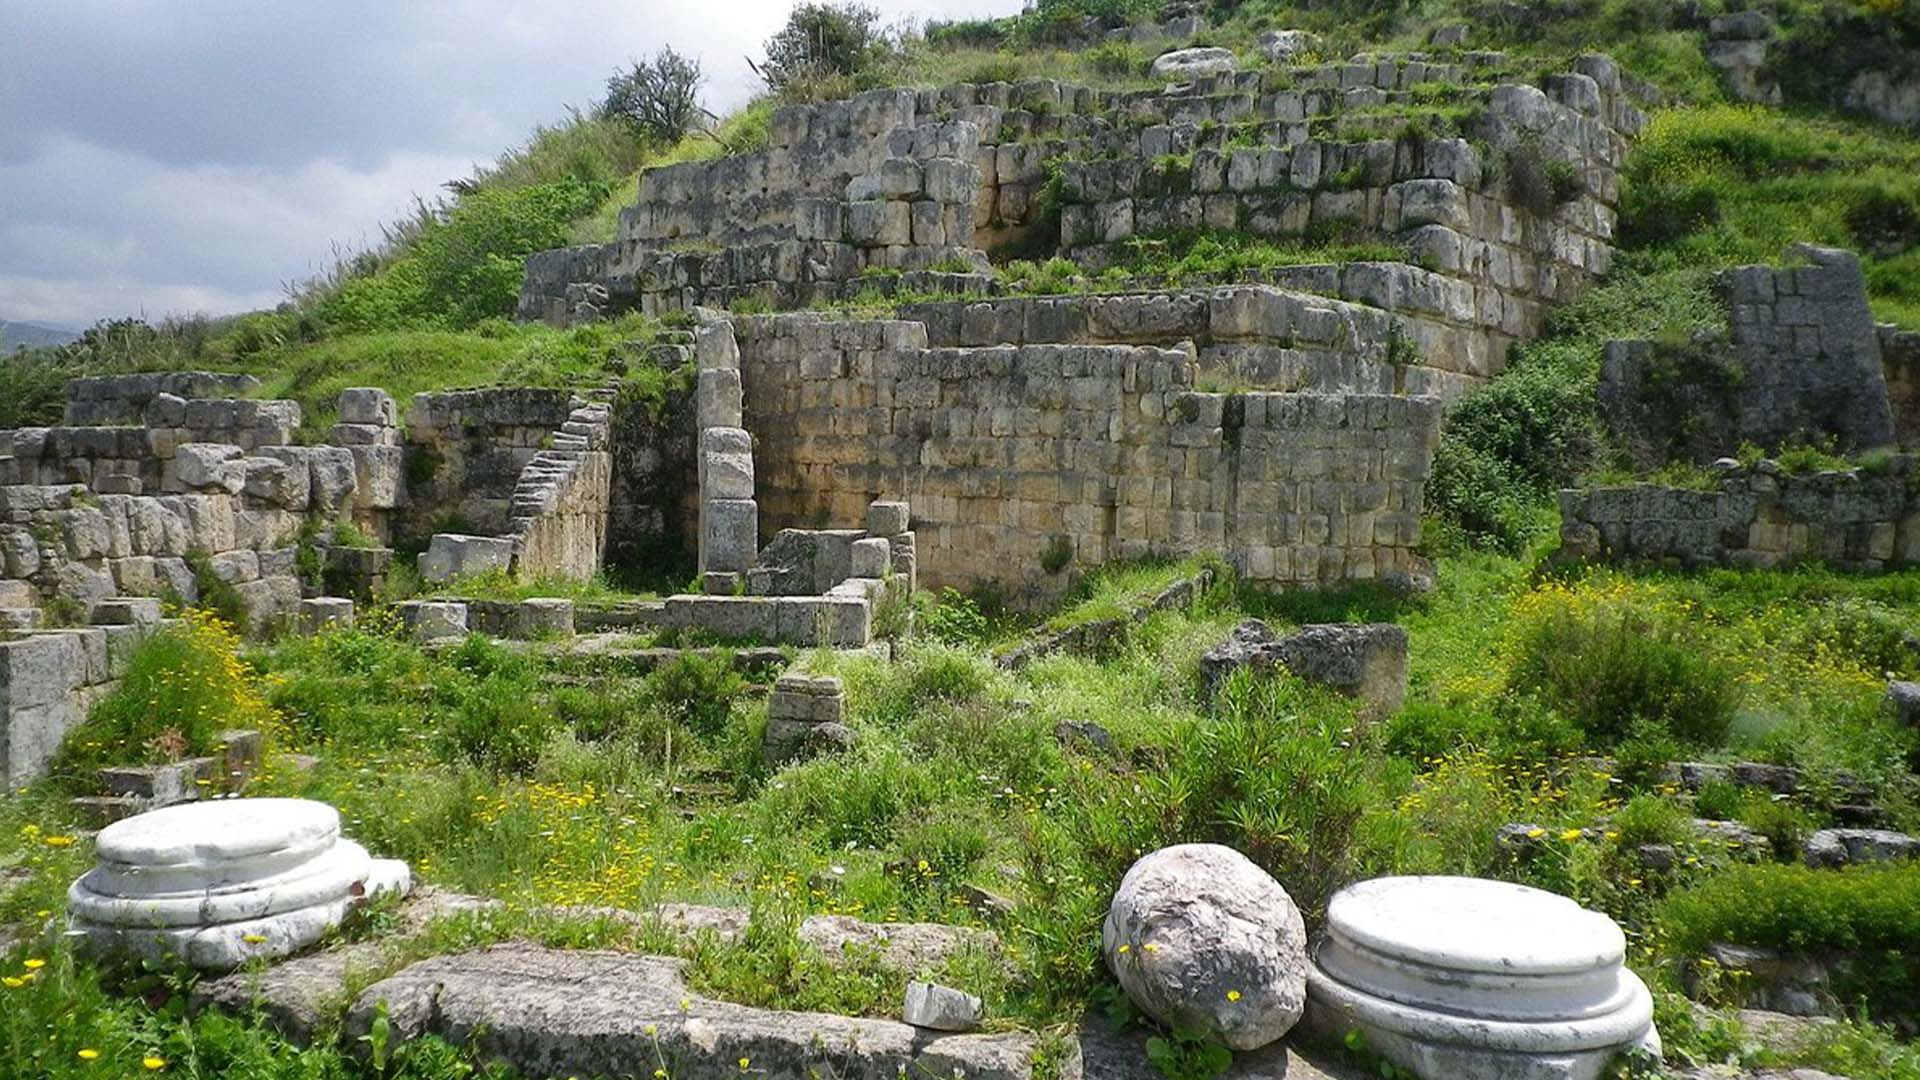 A photograph immortalizes the ruins of Echmoun, an ancient Phoenician city that held great importance, enveloped by a vibrant cloak of lush greenery